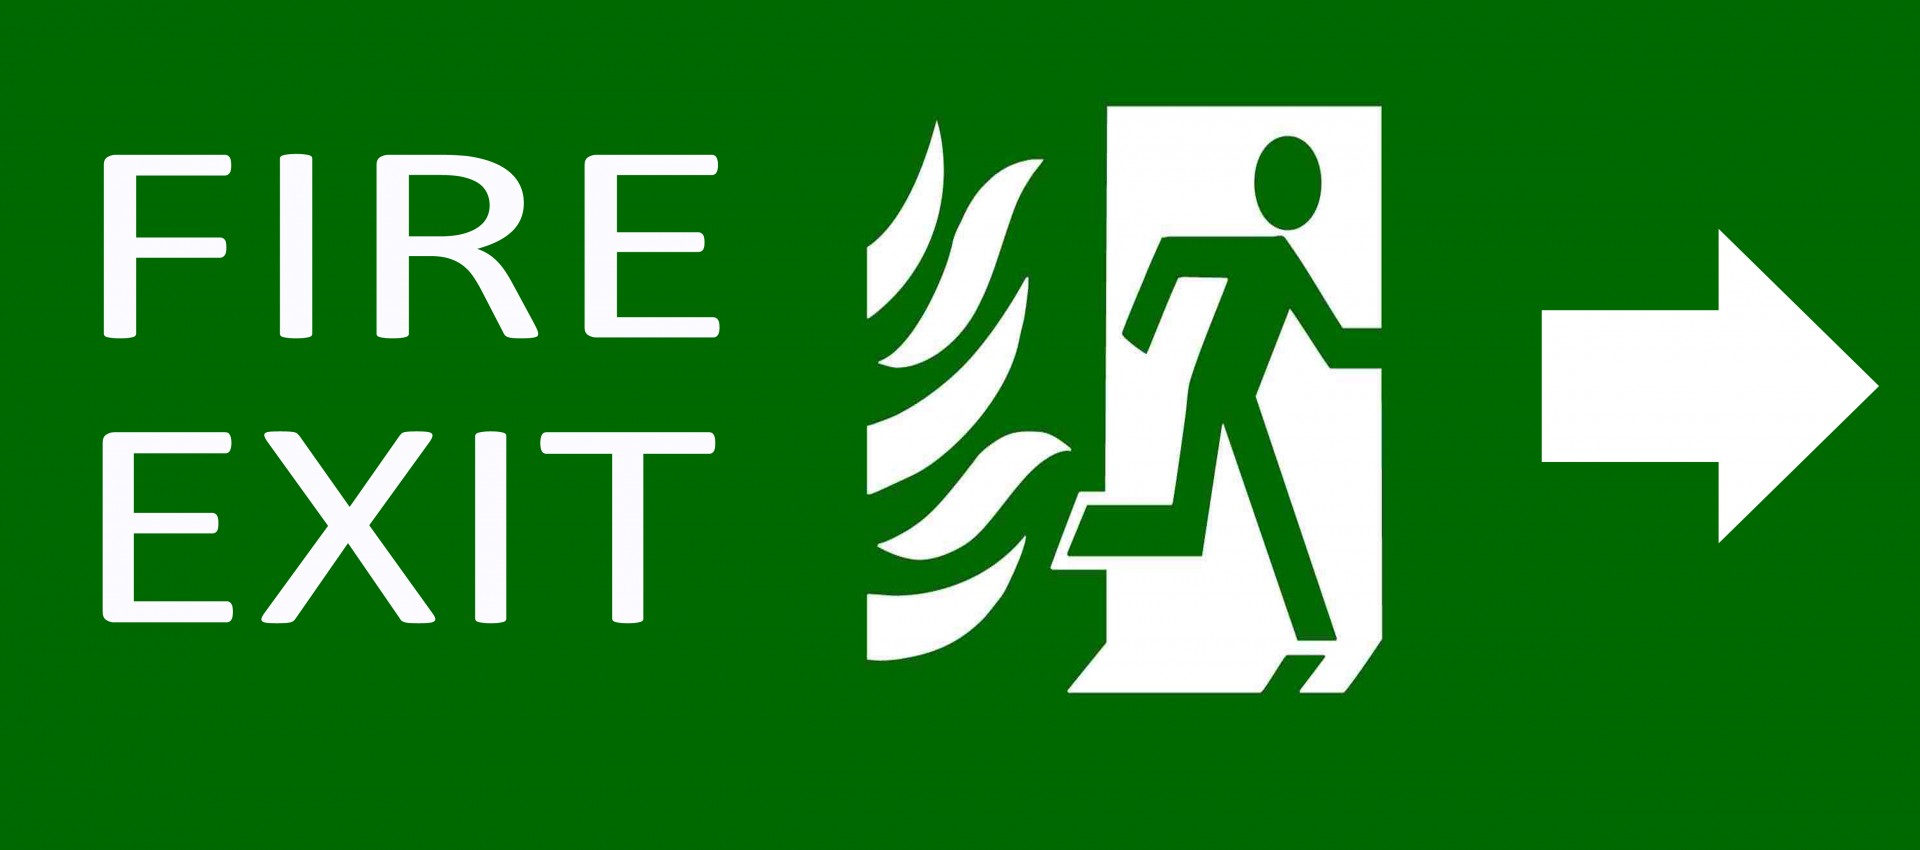 green-exit-emergency-sign-on-white.jpg